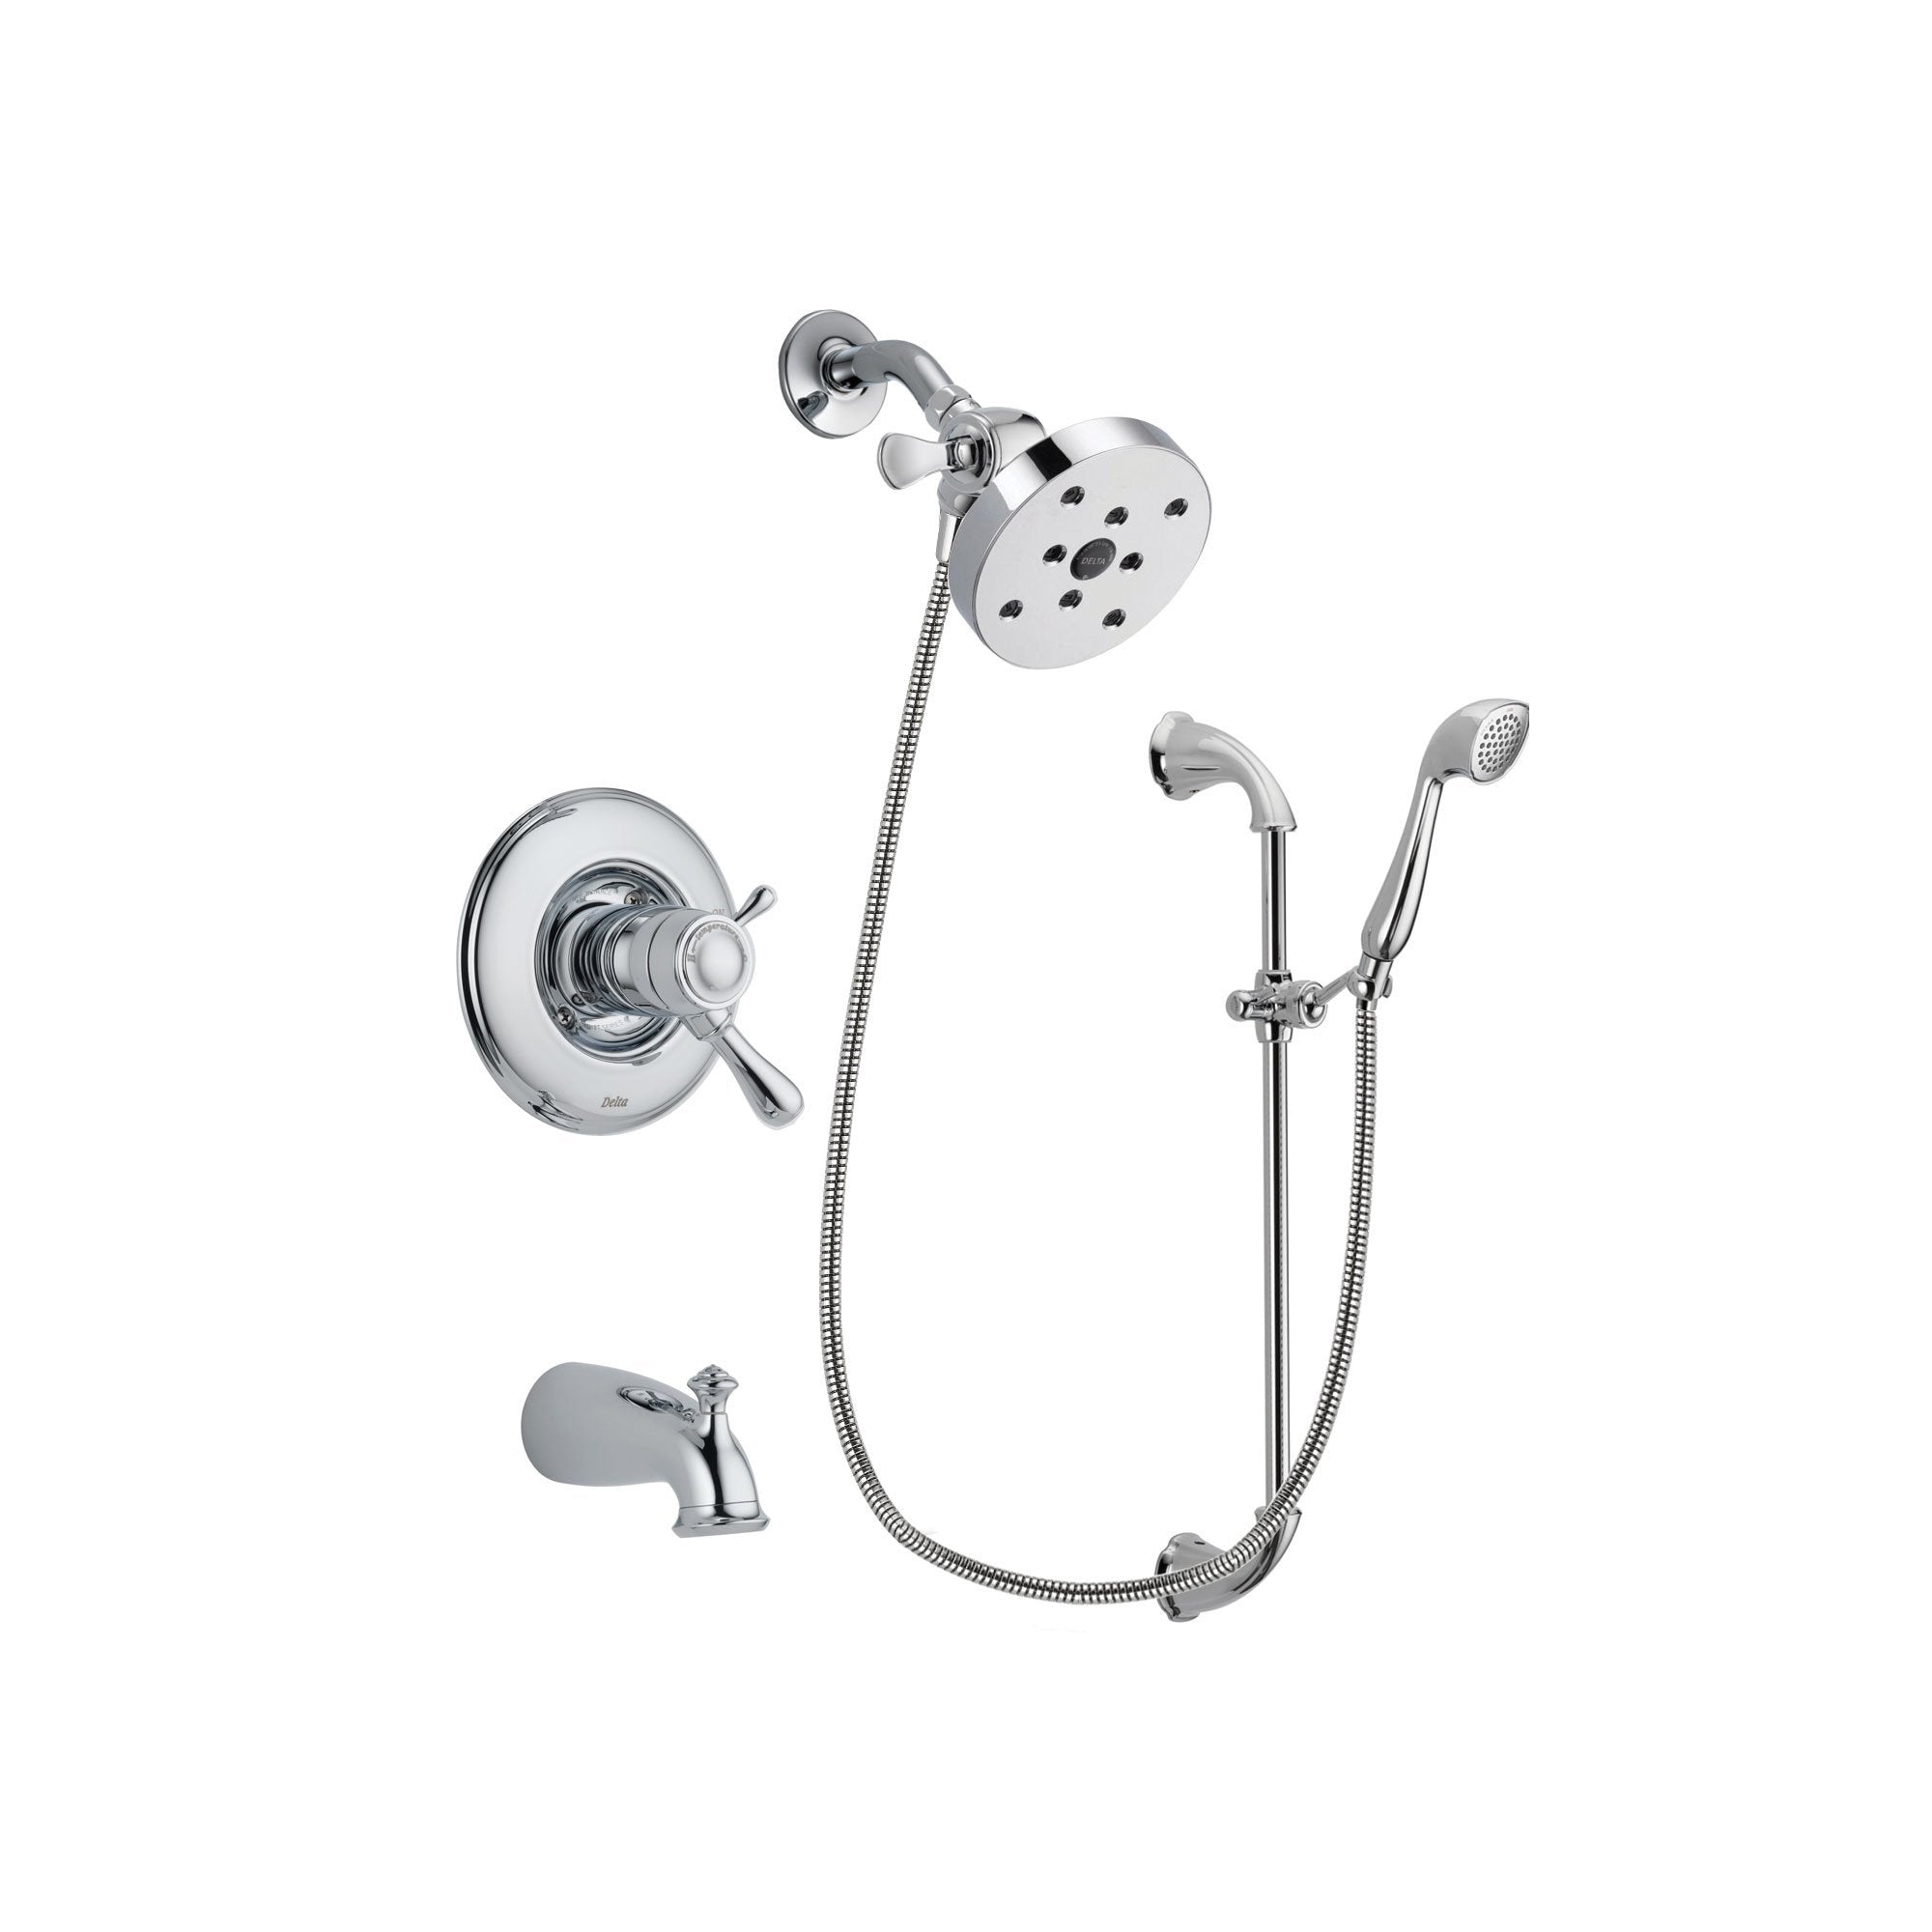 Delta Leland Chrome Finish Thermostatic Tub and Shower Faucet System Package with 5-1/2 inch Shower Head and Handheld Shower with Slide Bar Includes Rough-in Valve and Tub Spout DSP0939V